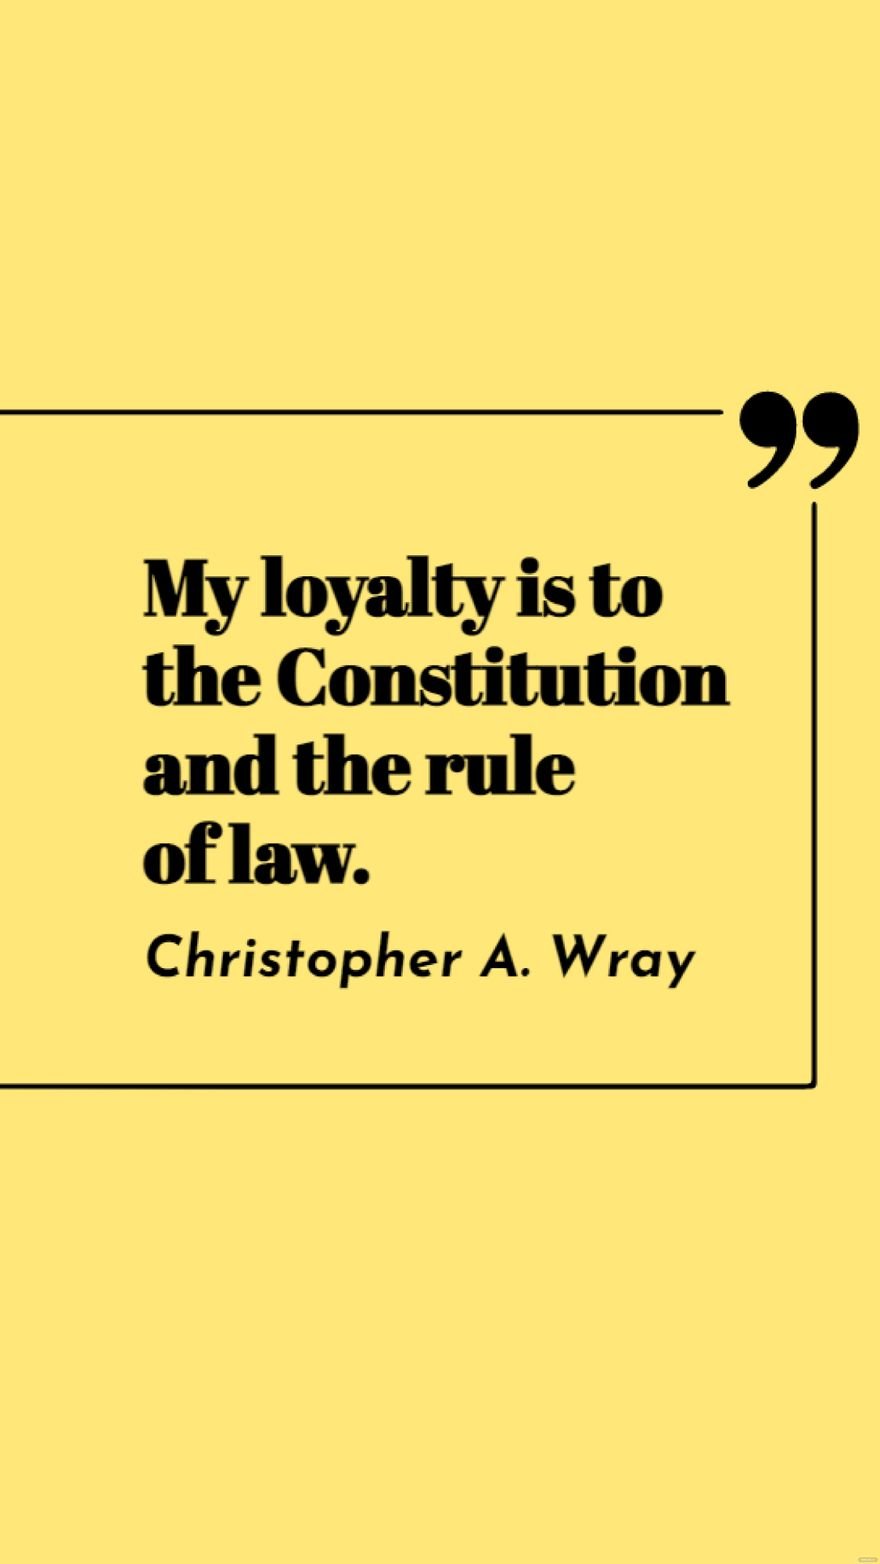 Free Christopher A. Wray - My loyalty is to the Constitution and the rule of law.